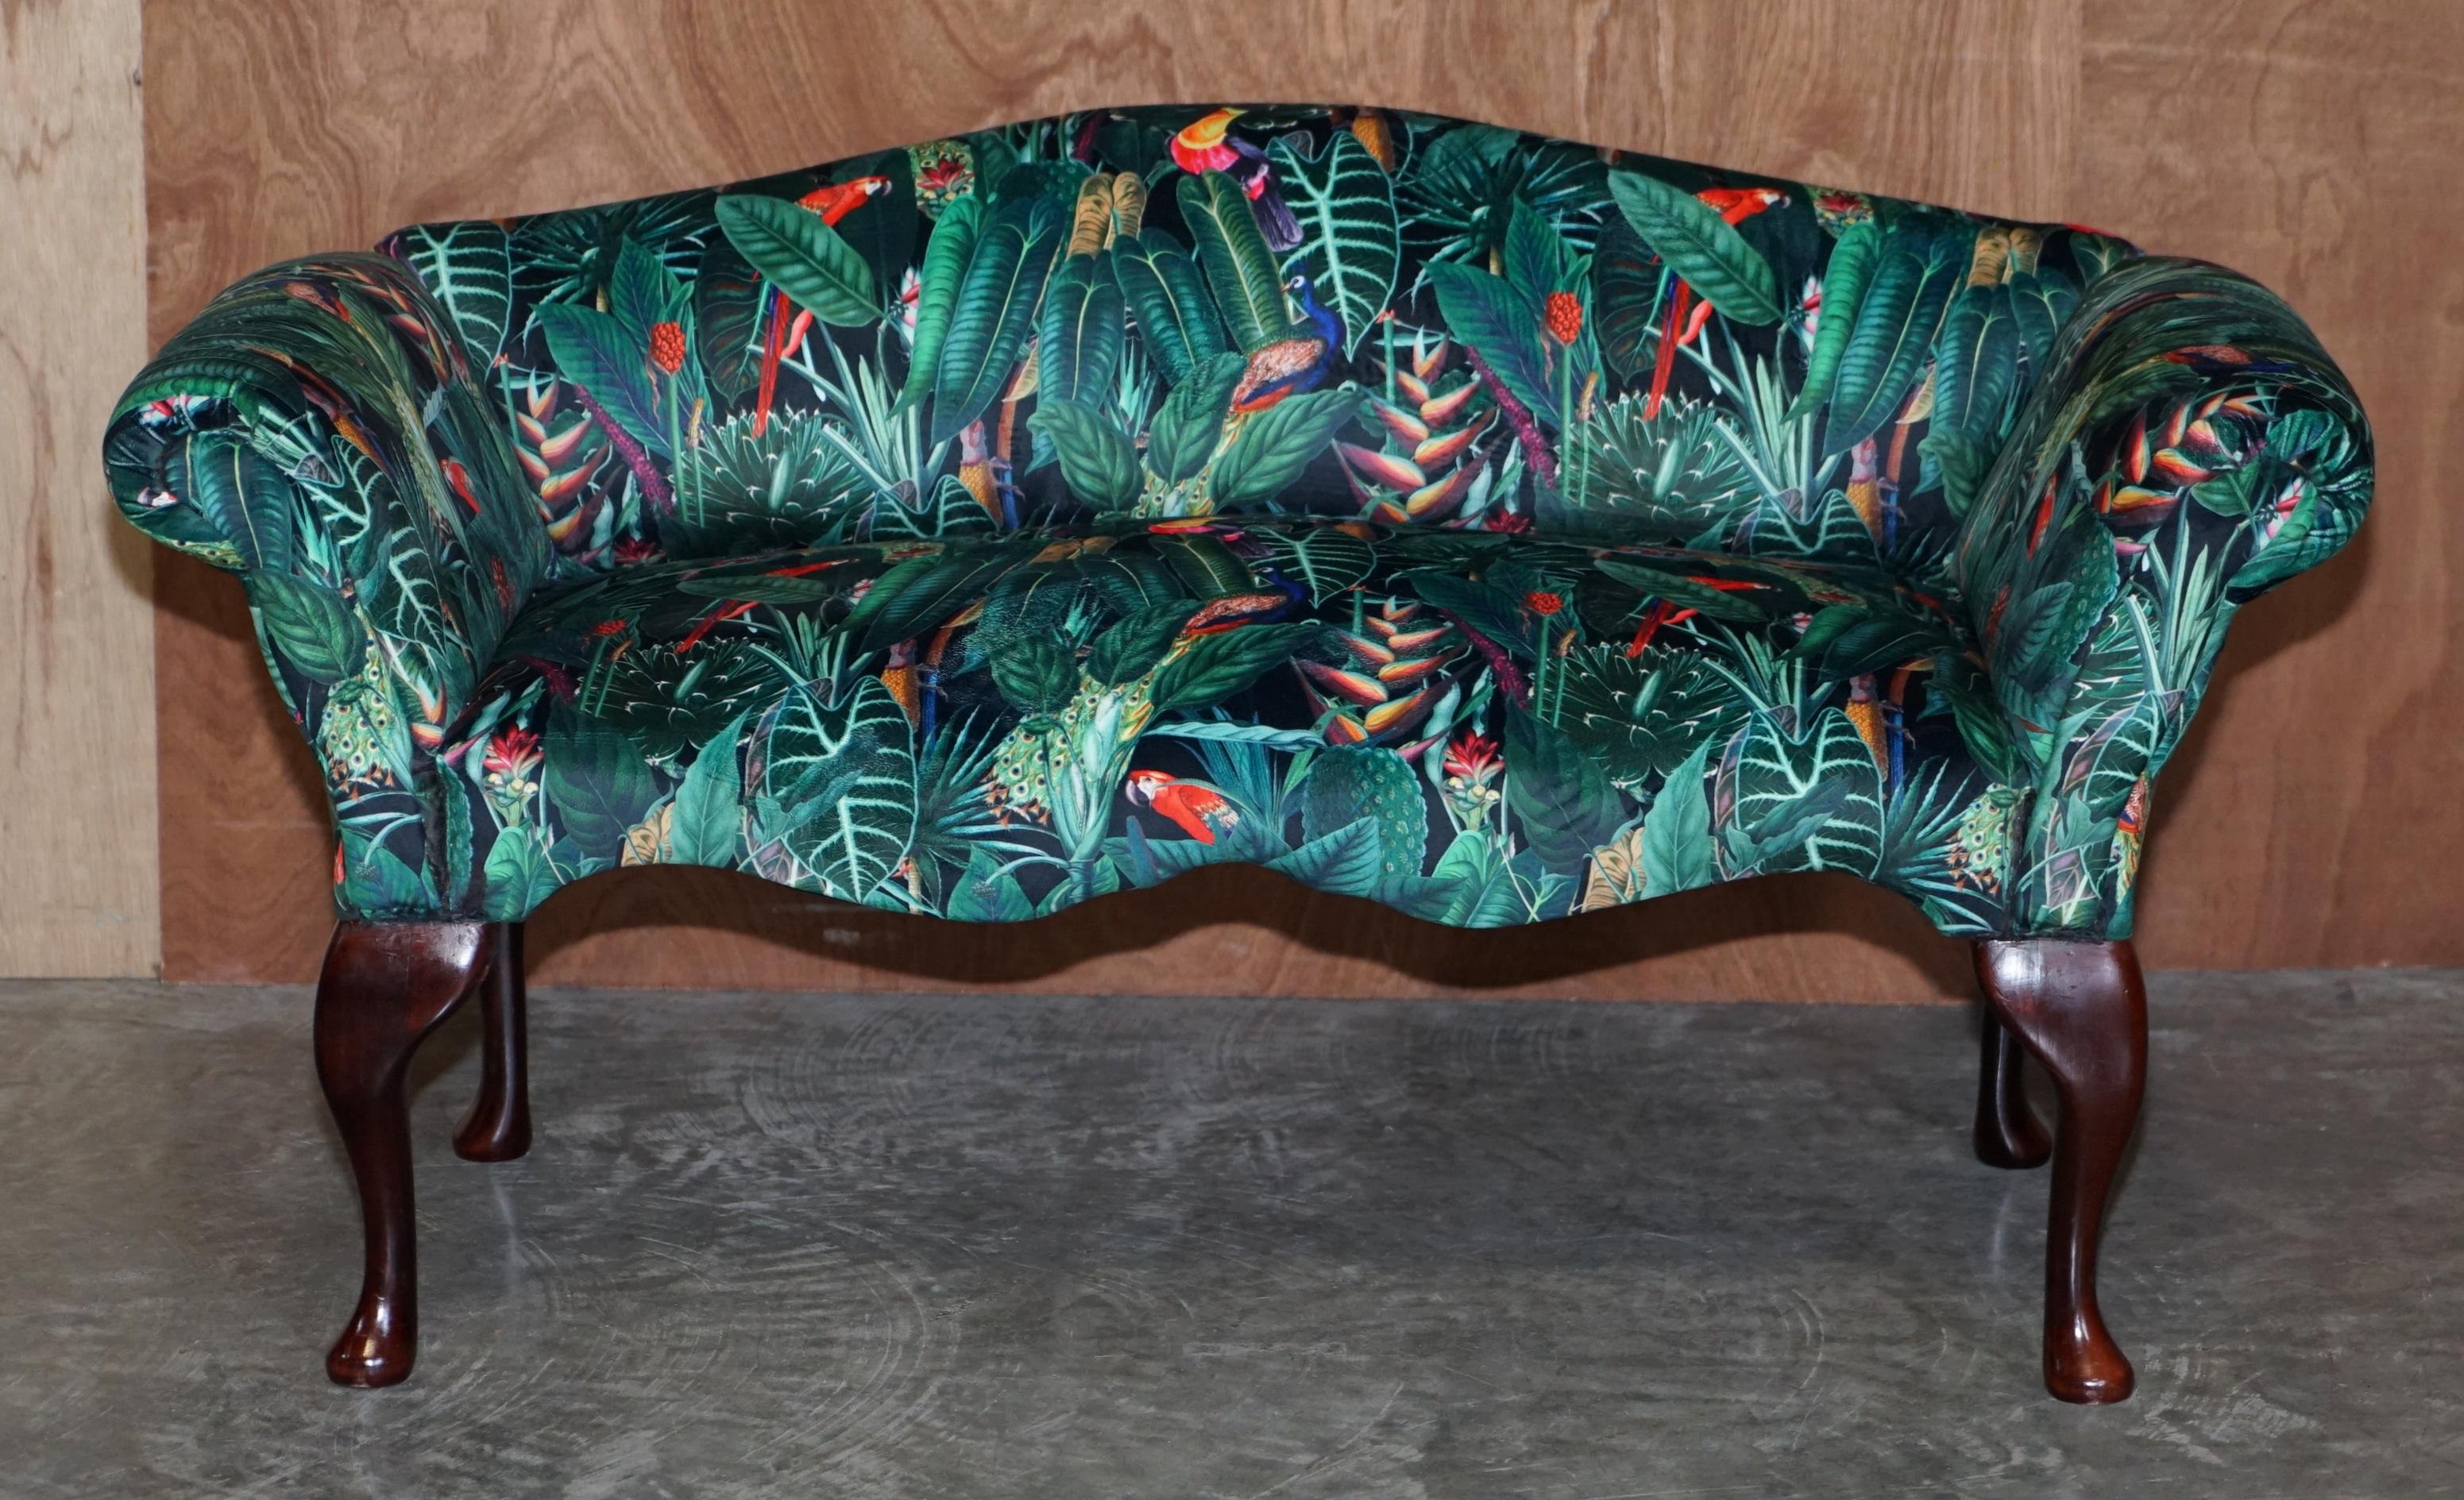 We are delighted to offer for sale this lovely vintage mini sofa window seat which has been reupholstered in Birds of Paradise velvety fabric 

The piece is part of a suite, in total I have a walnut framed carved Italia armchair, an English large